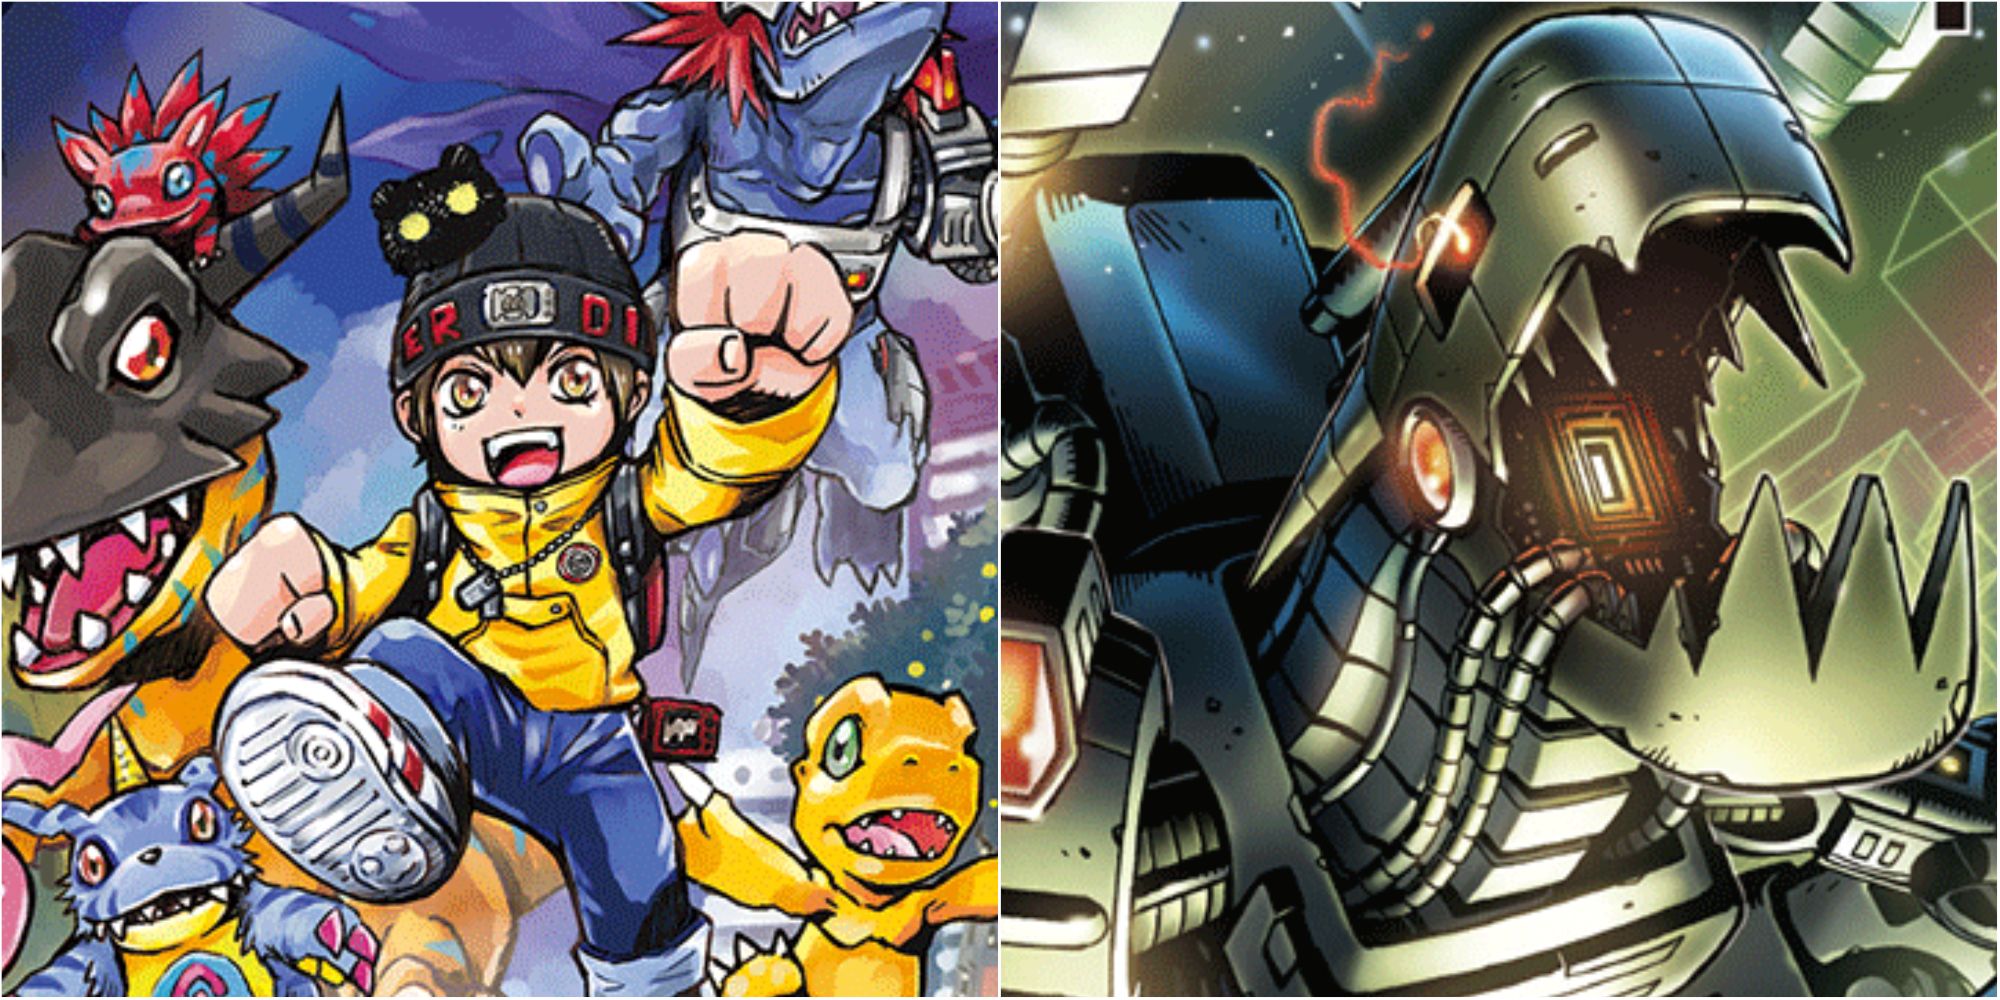 The Resurrection of the Classic Digimon Masterpiece, Digimon RPG